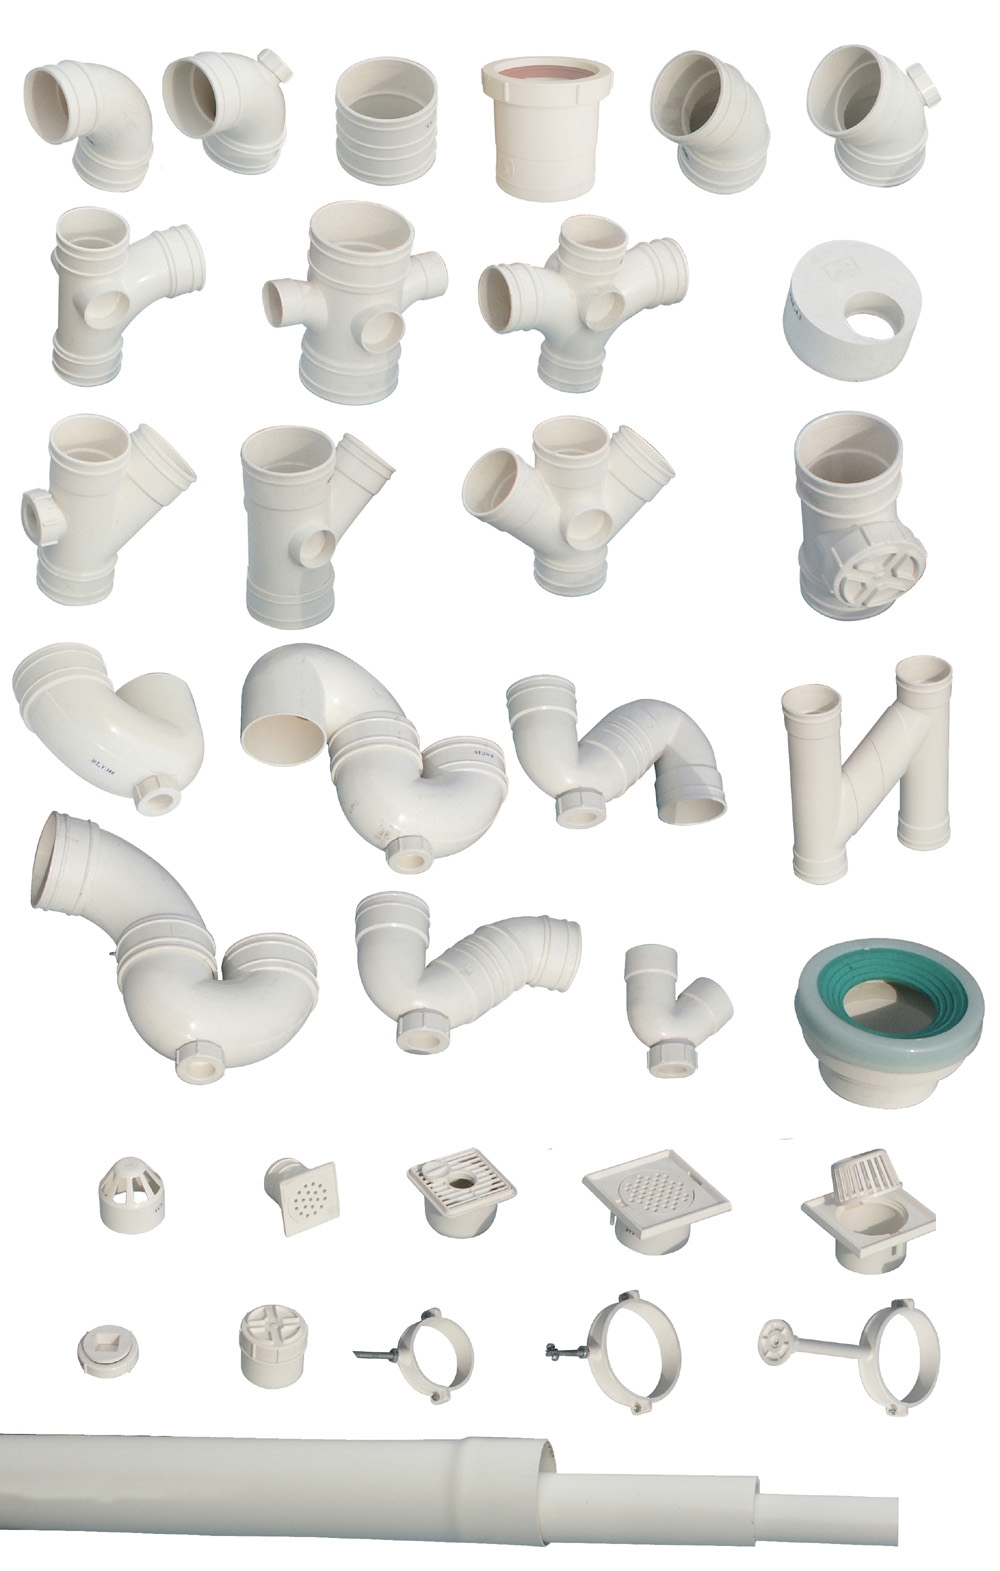 PVC-U Pipe and fittings for drainage